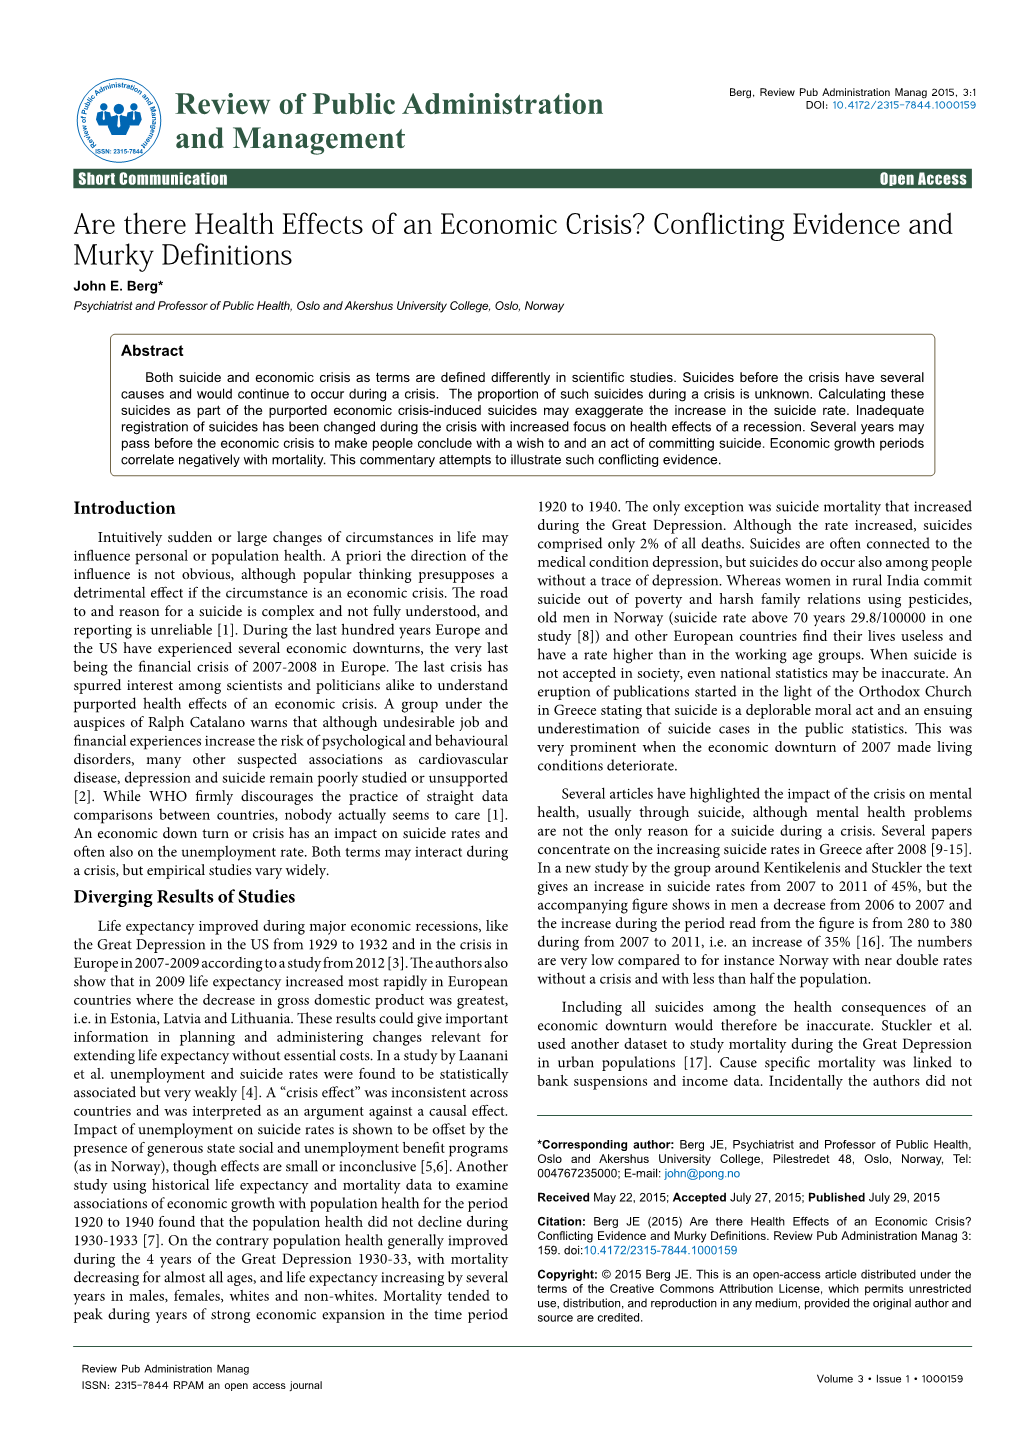 Are There Health Effects of an Economic Crisis? Conflicting Evidence and Murky Definitions John E